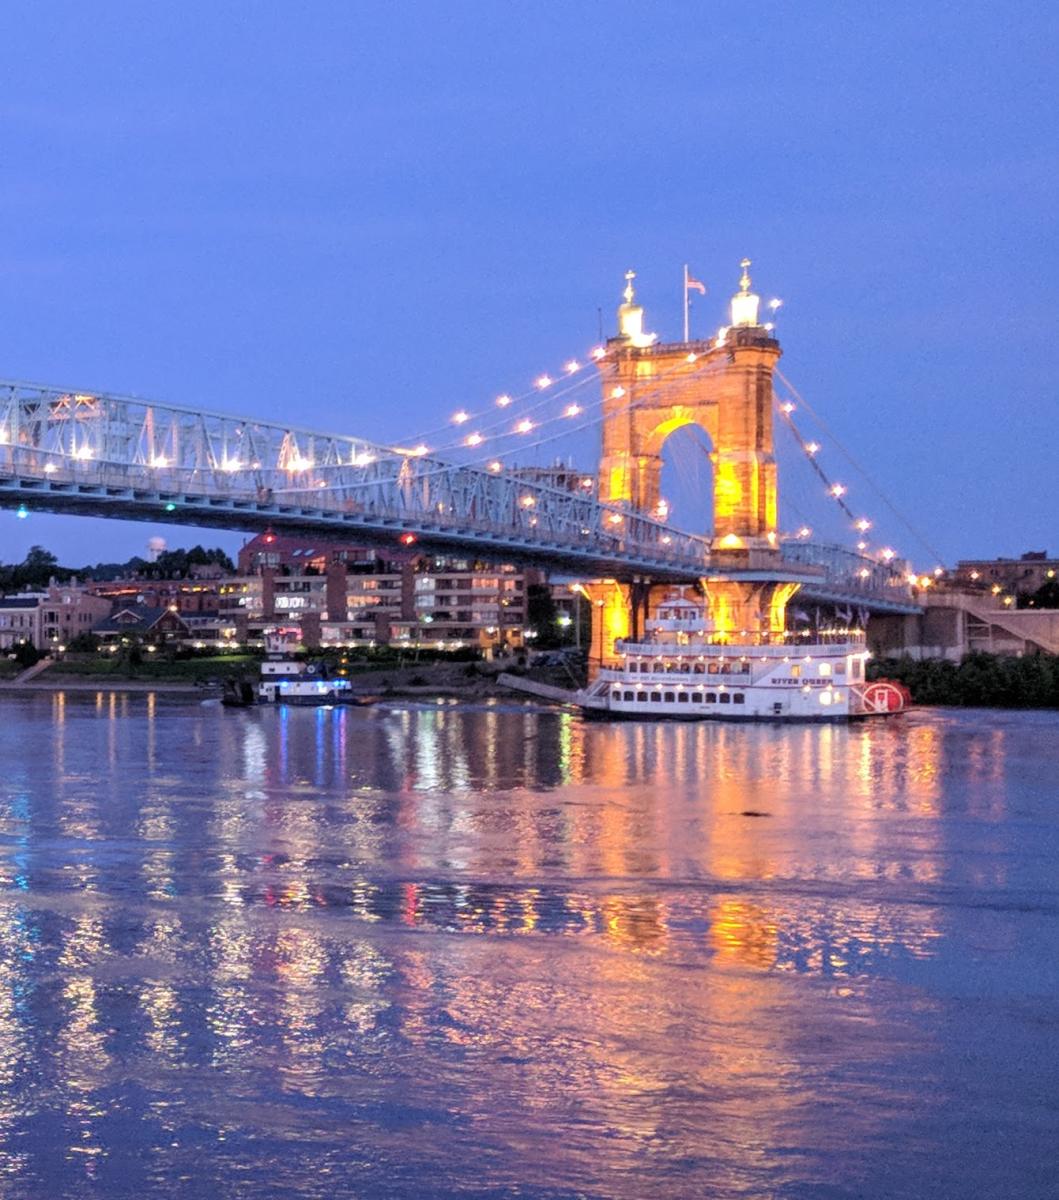 The Roebling Suspension bridge connecting Northern Kentucky to Cincinnati, with the Ohio river looking pink and blue in the sunset and a BB Riverboat sailing under the bridge